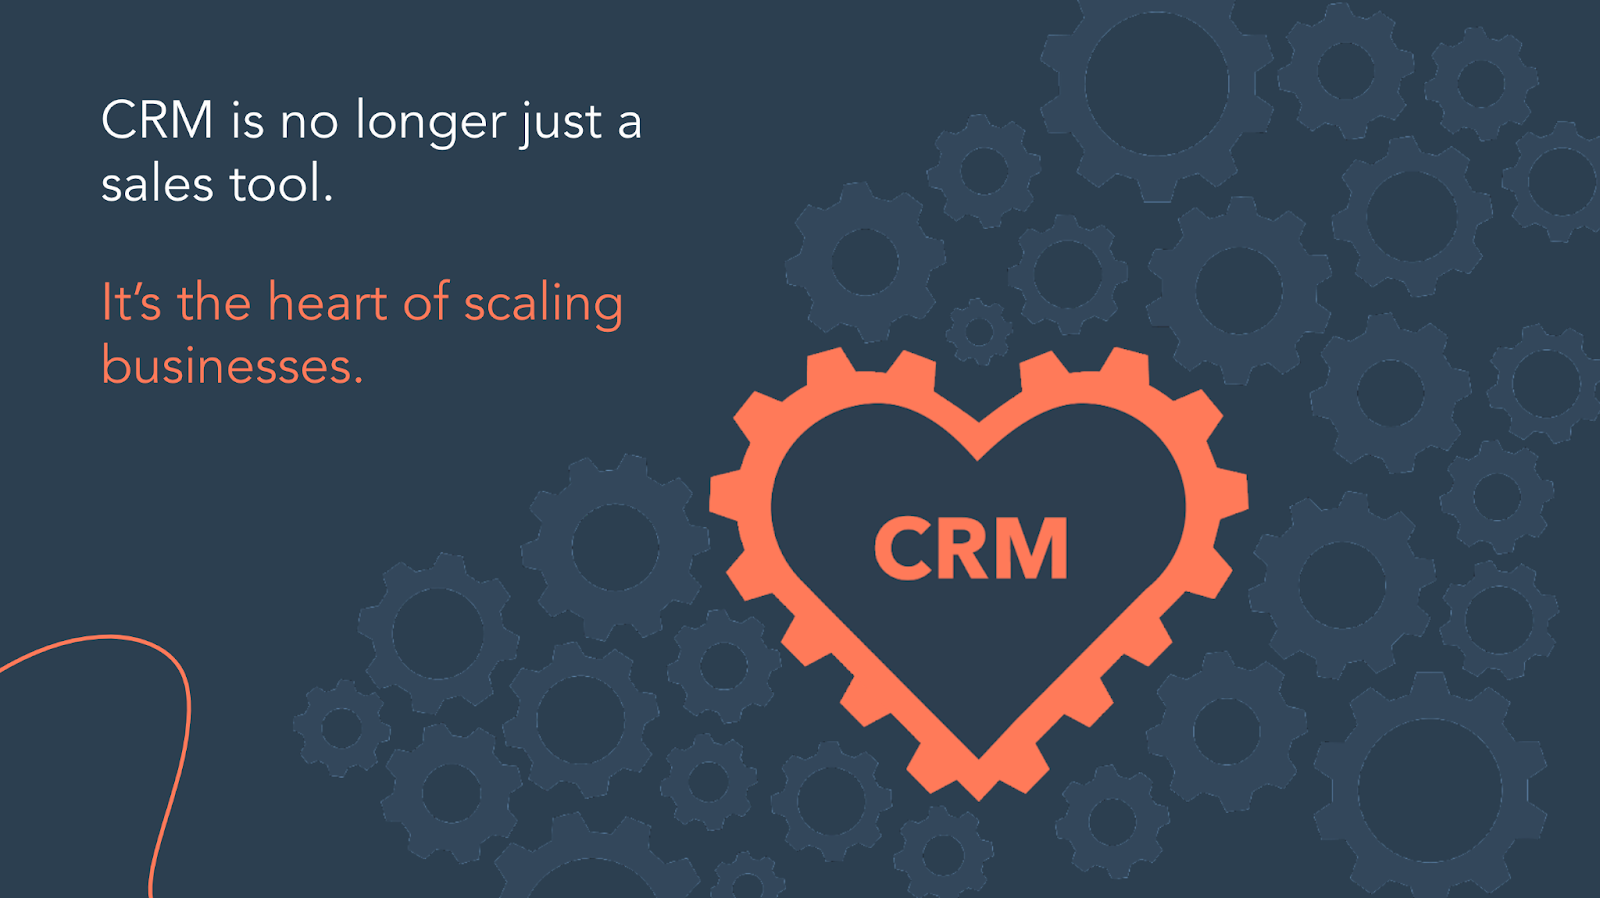 CRM is the heart of scaling businesses